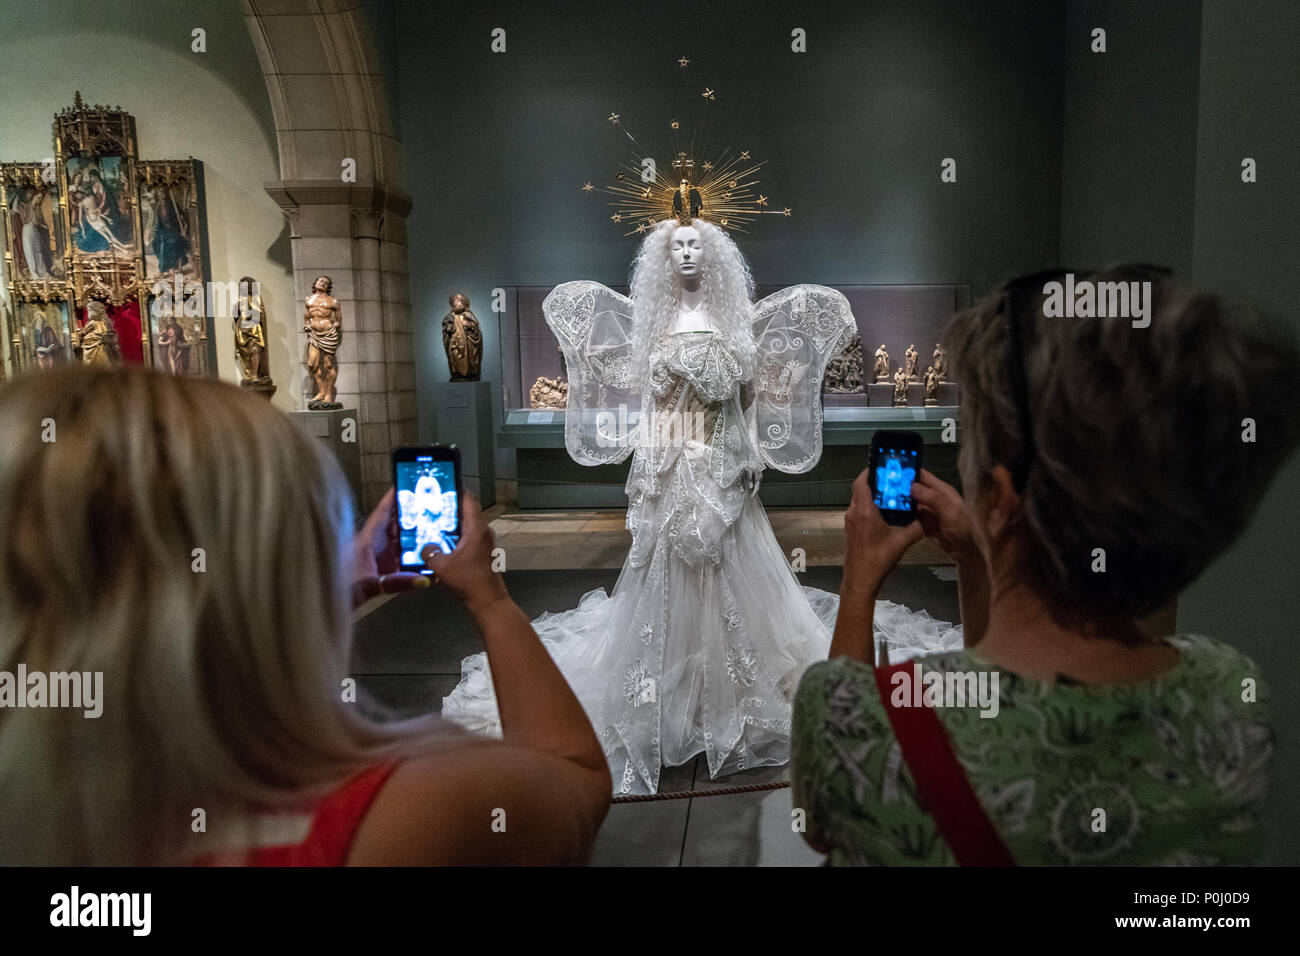 New York, USA. 9th June 2018. NEW YORK, USA, 9 June 2018. 'Madonna' Wedding ensemble designed by John Galliano for the House of Dior on display at the Metropolitan Museum of Art for the 'Heavenly Bodies' exhibition. This ensemble is made of white silk tulle, embroidered white silk and metal thread.  Photo by Enrique Shore Credit: Enrique Shore/Alamy Live News Stock Photo